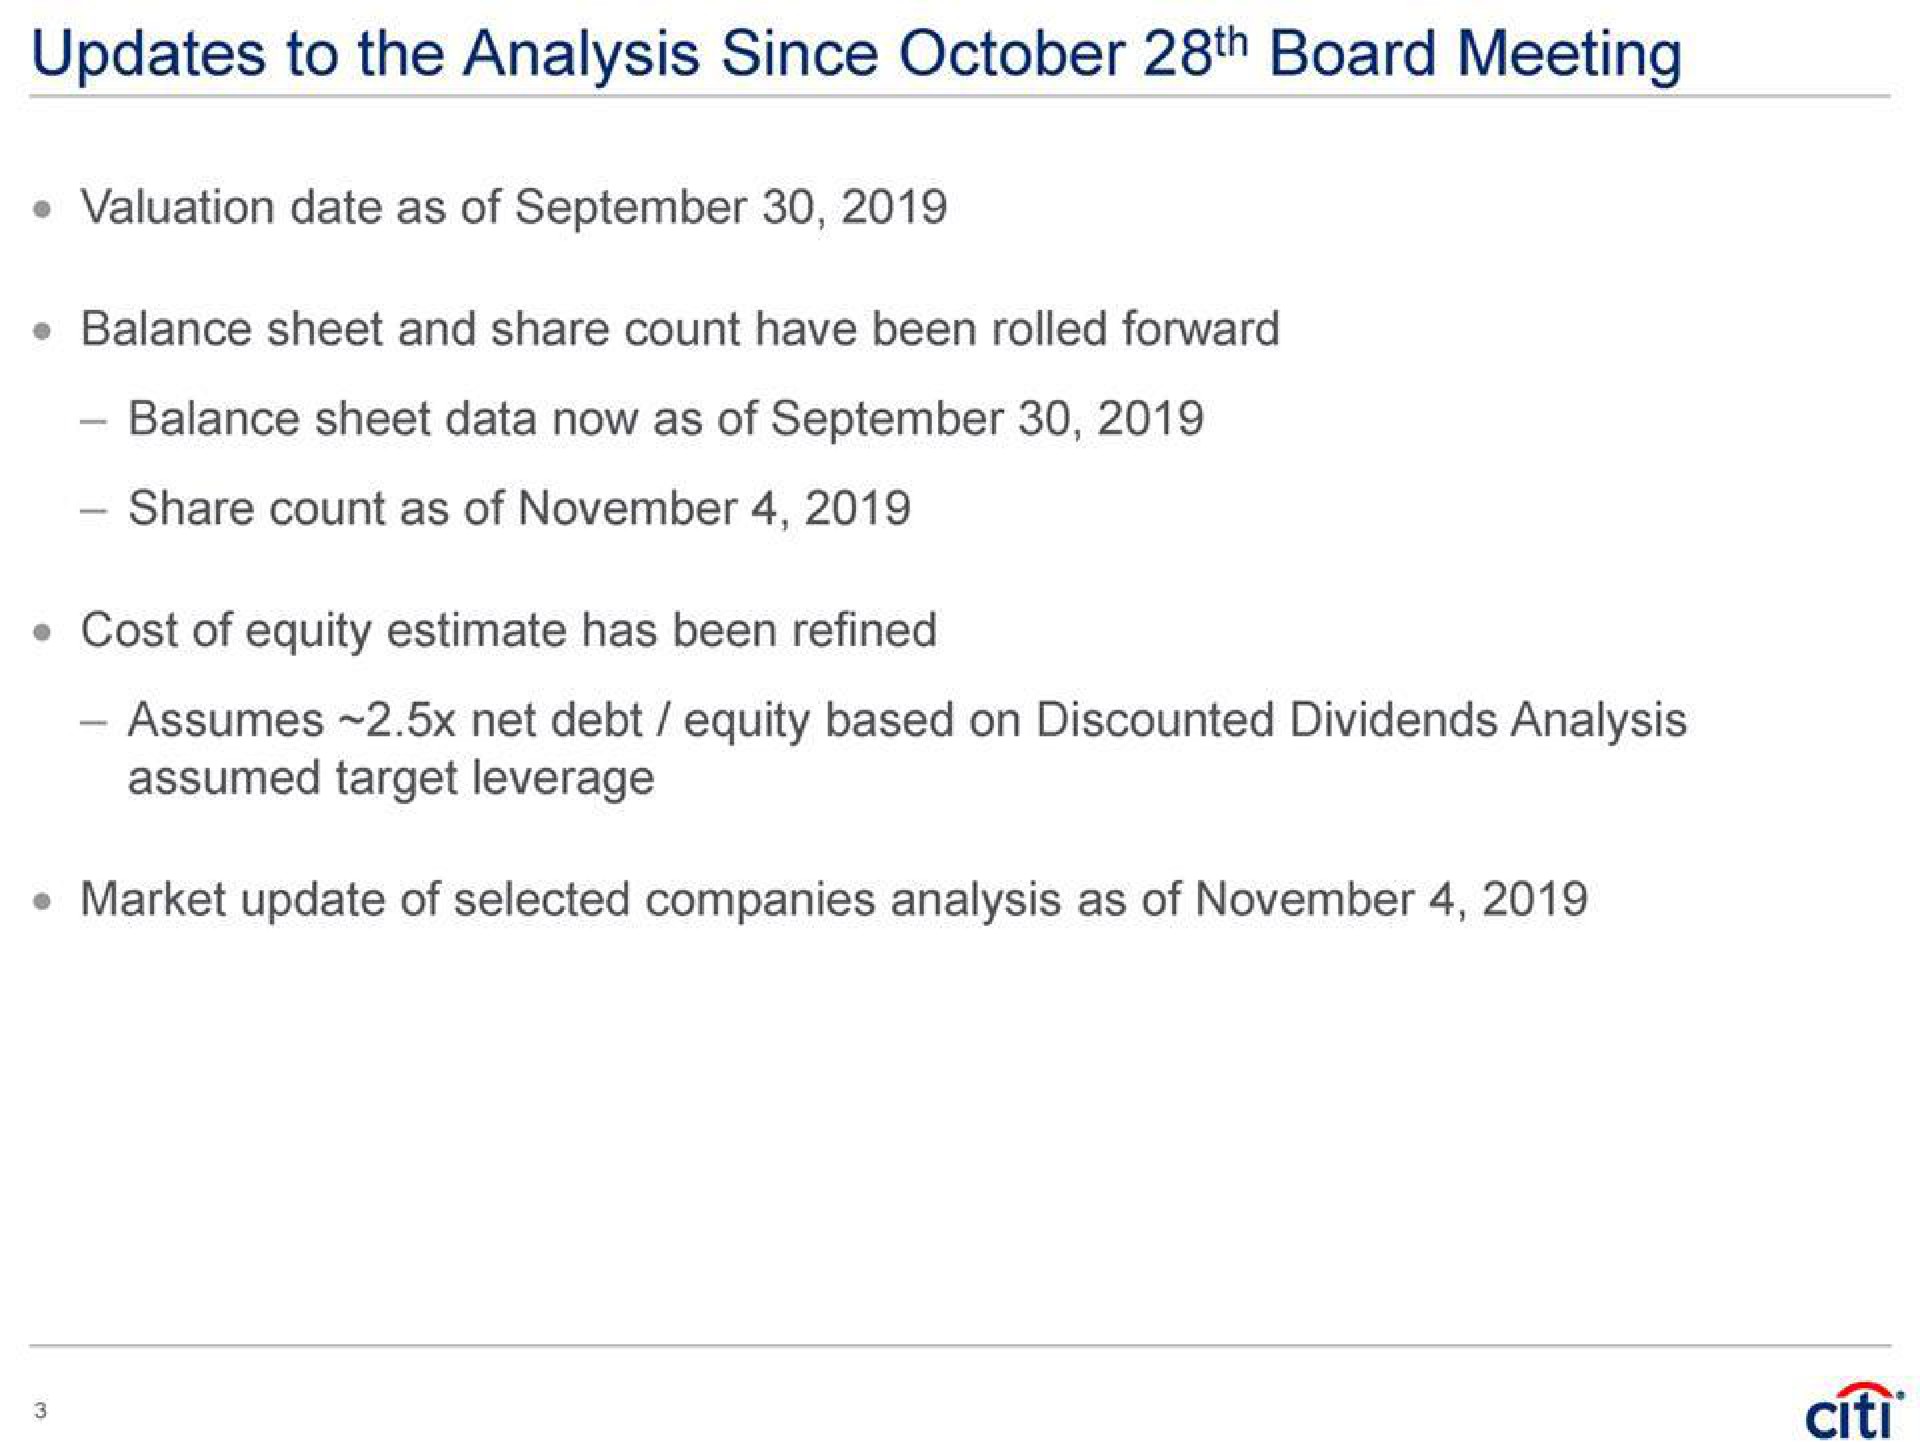 updates to the analysis since board meeting valuation date as of balance sheet and share count have been rolled forward balance sheet data now as of share count as of cost of equity estimate has been refined assumes net debt equity based on discounted dividends analysis assumed target leverage market update of selected companies analysis as of | Citi